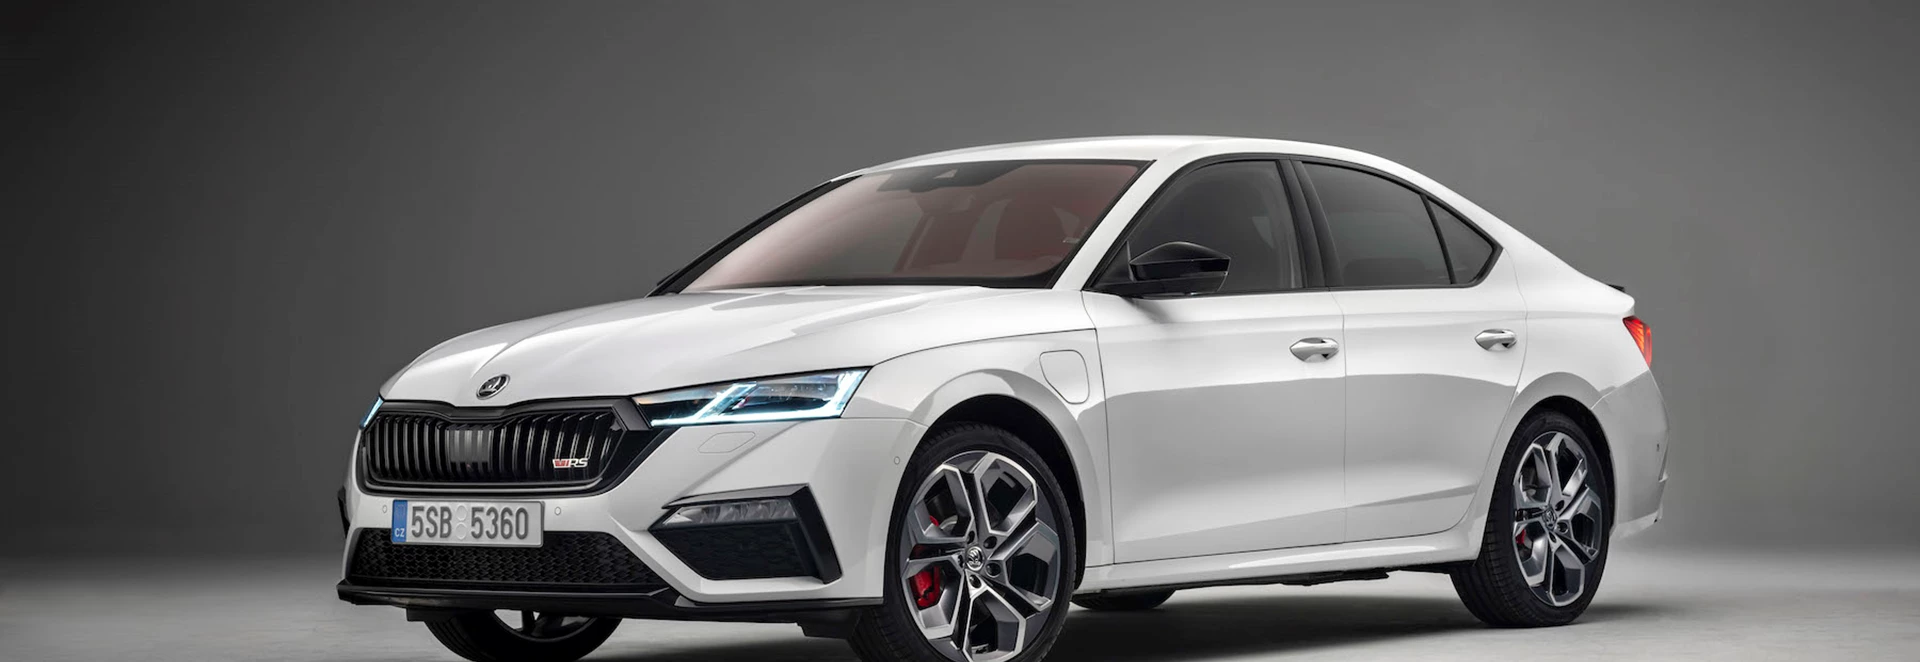 Skoda: What new models are on the way? 